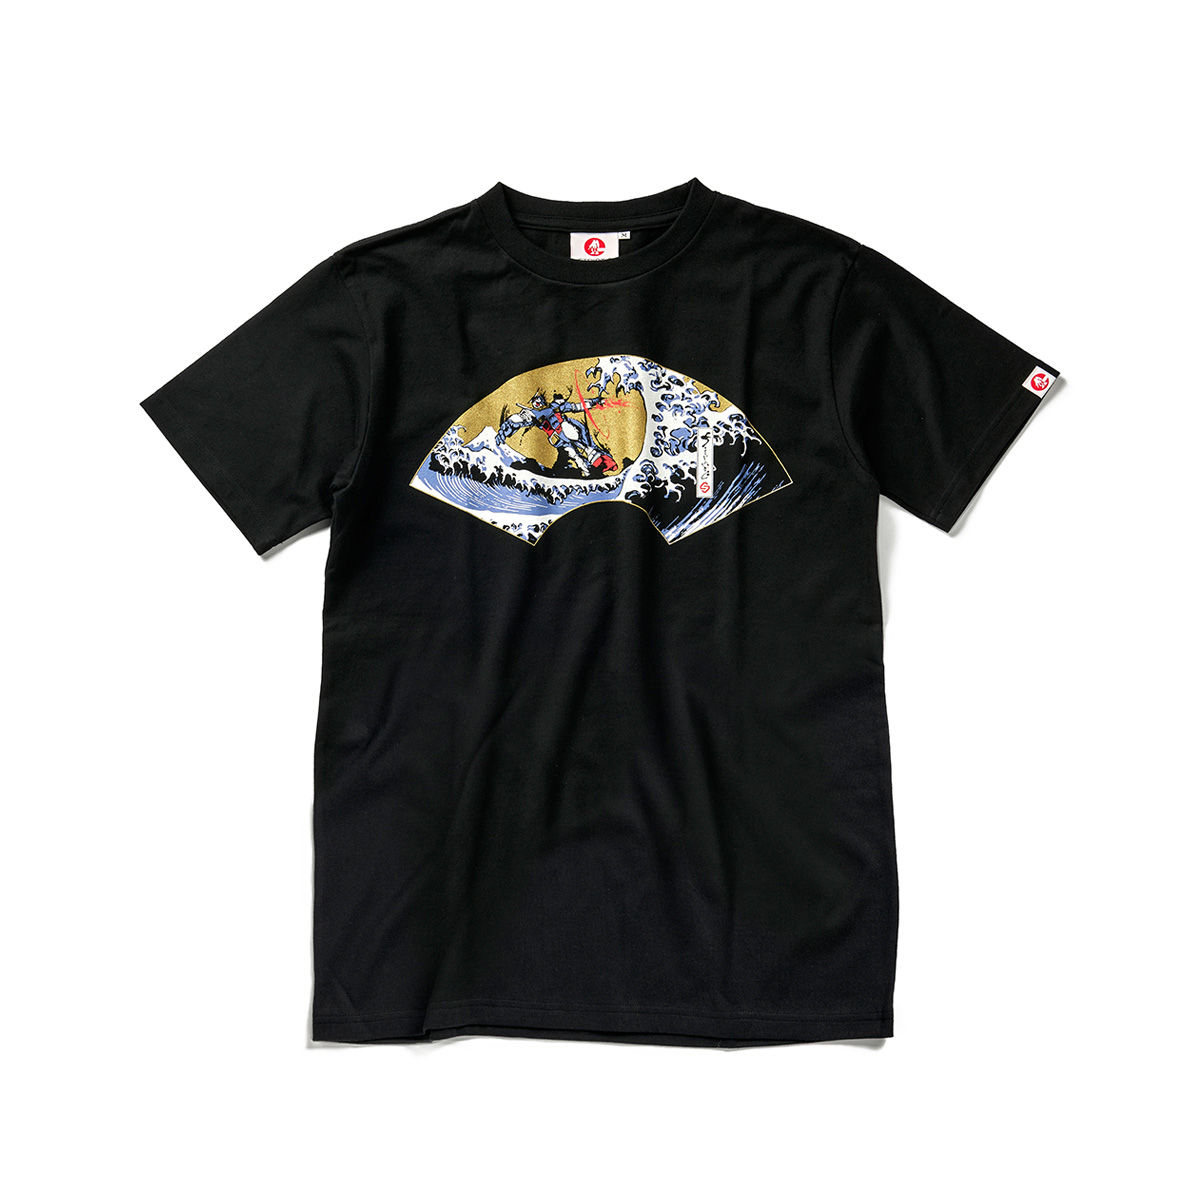 Gundam and the Big Wave T-shirt—Mobile Suit Gundam/STRICT-G JAPAN Collaboration